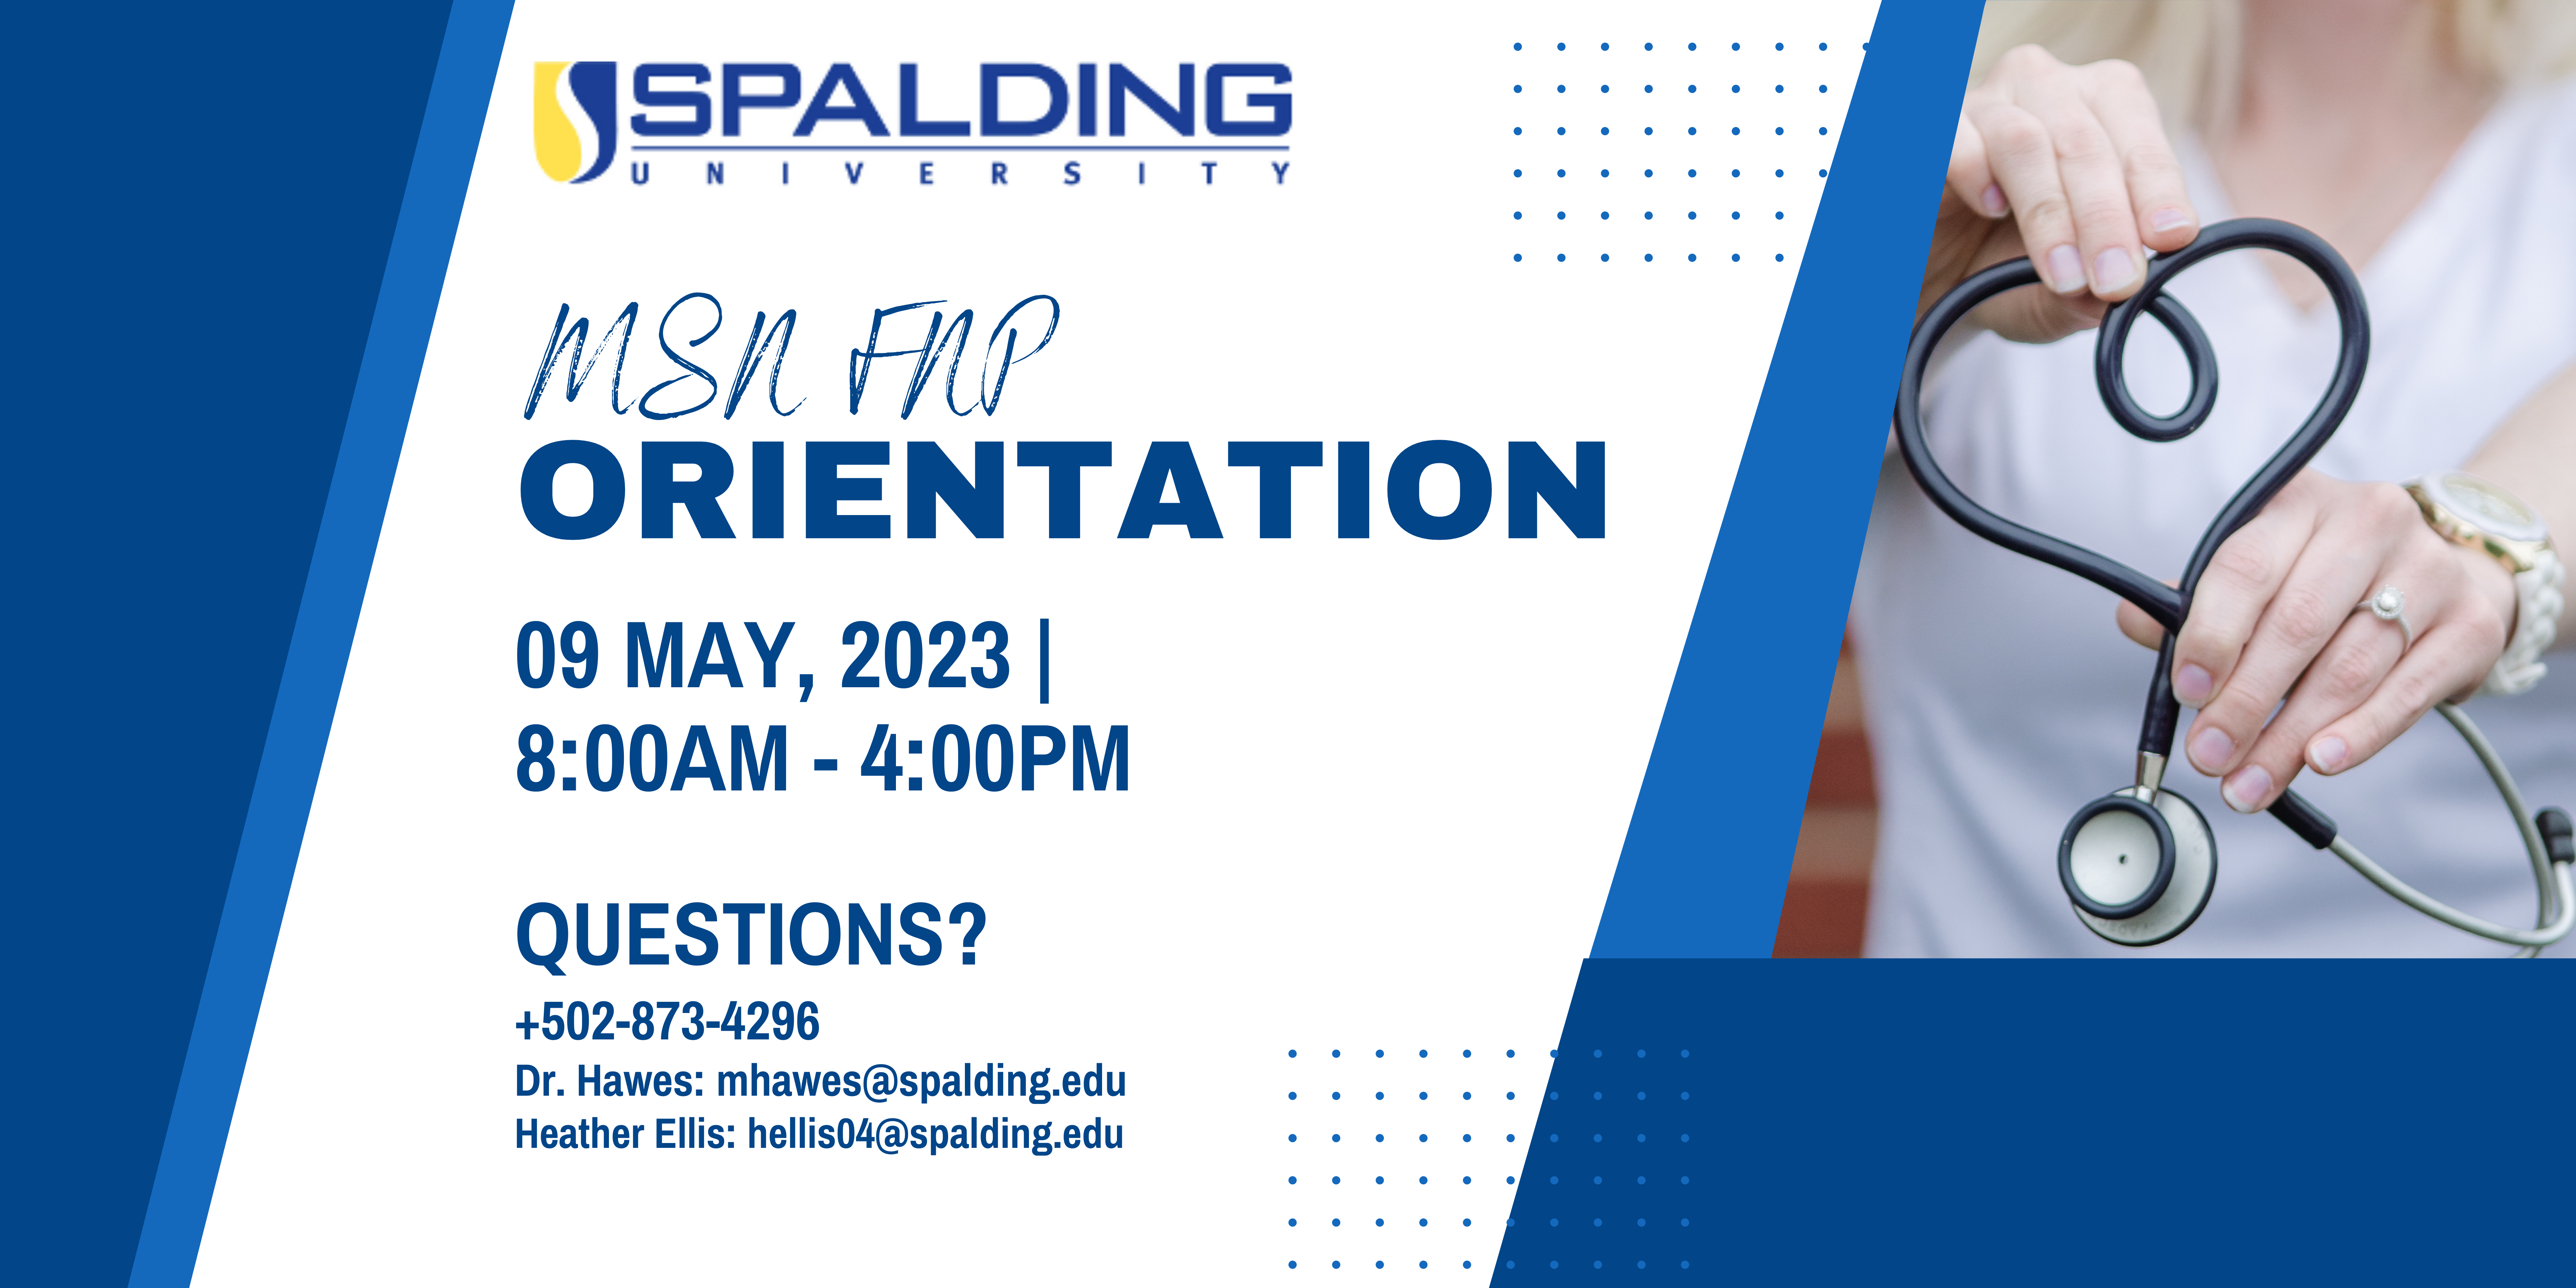 New students, join us for the May 9th student orientation for our Master of Science in Nursing as a Family Practitioner program.